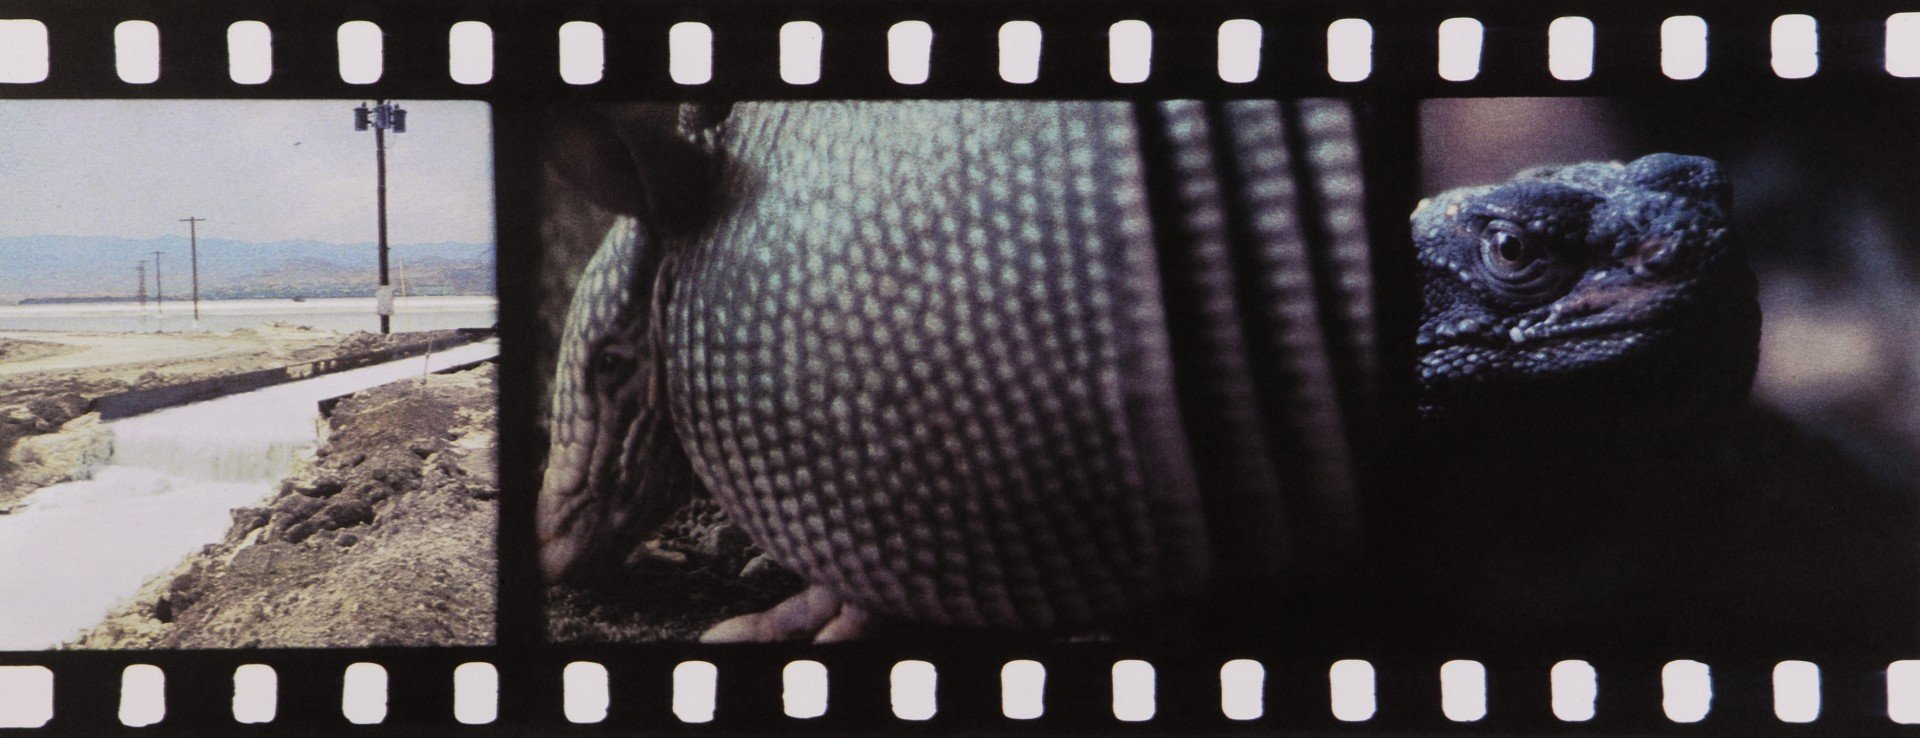 Tacita Dean, JG, 35 mm color and black and white anamorphic film with optical sound of 26 ½ minutes, 2013. Courtesy of Marian Goodman, Paris.